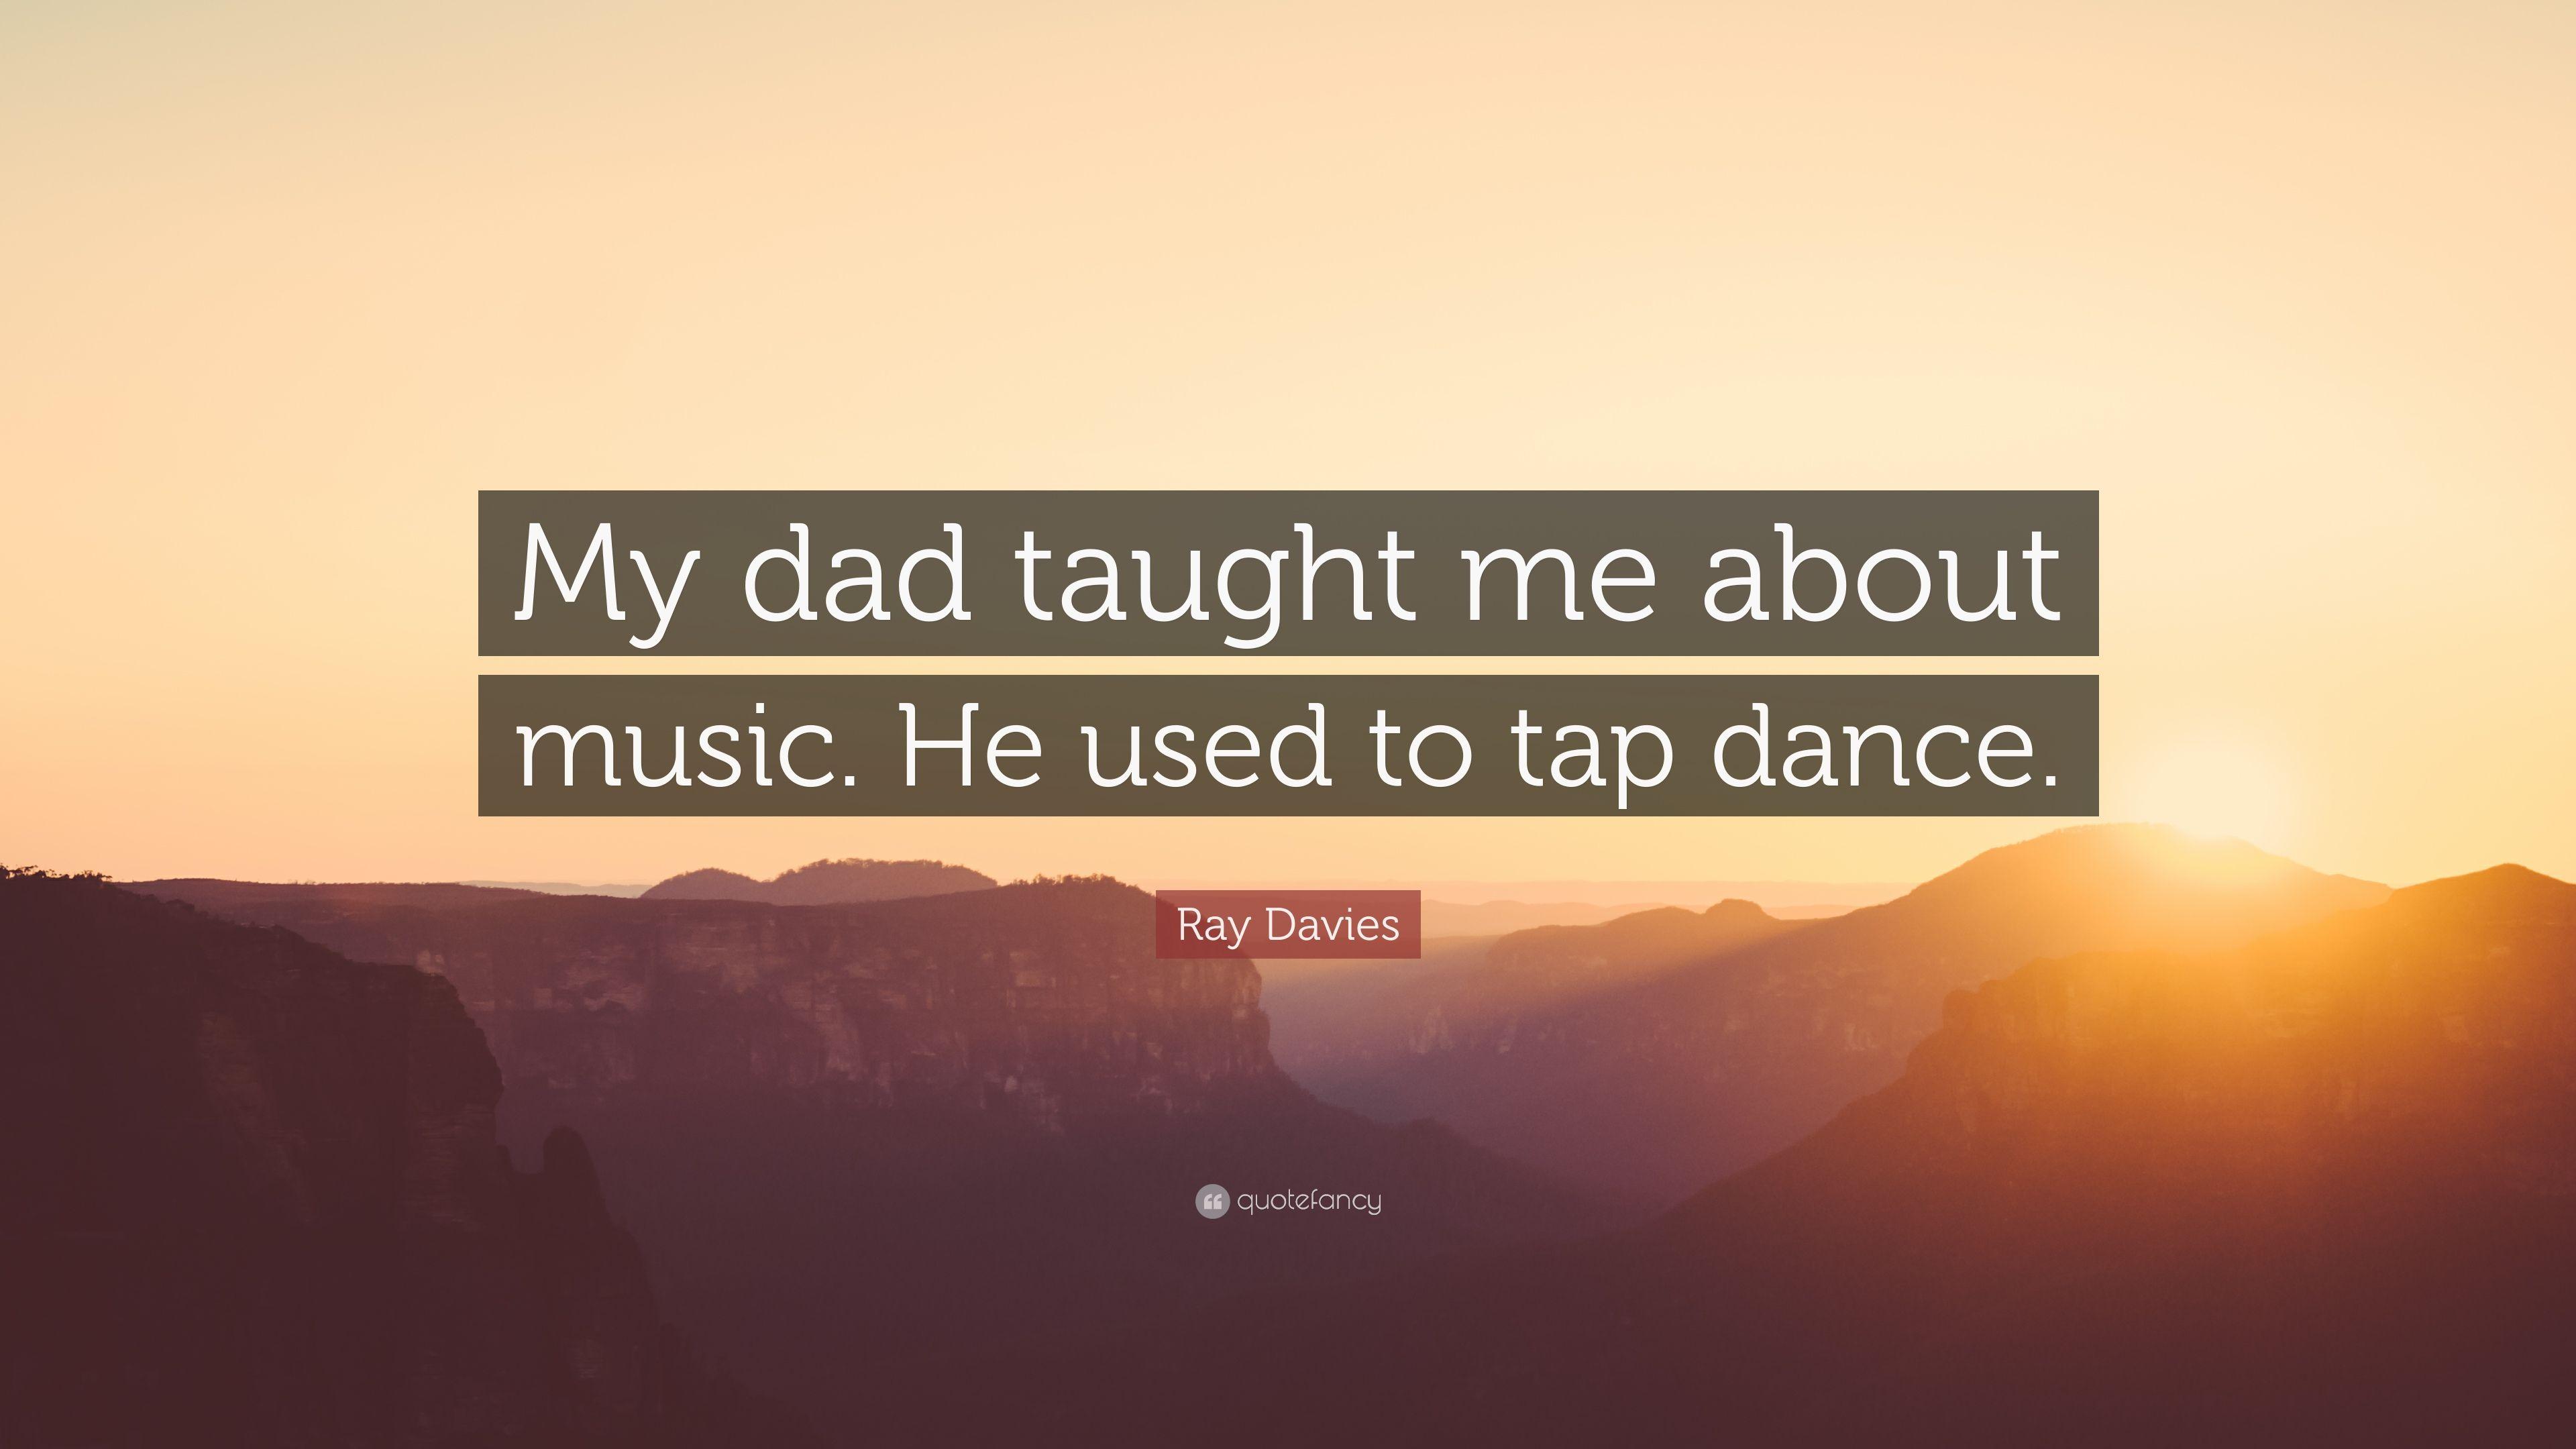 Ray Davies Quote: “My dad taught me about music. He used to tap